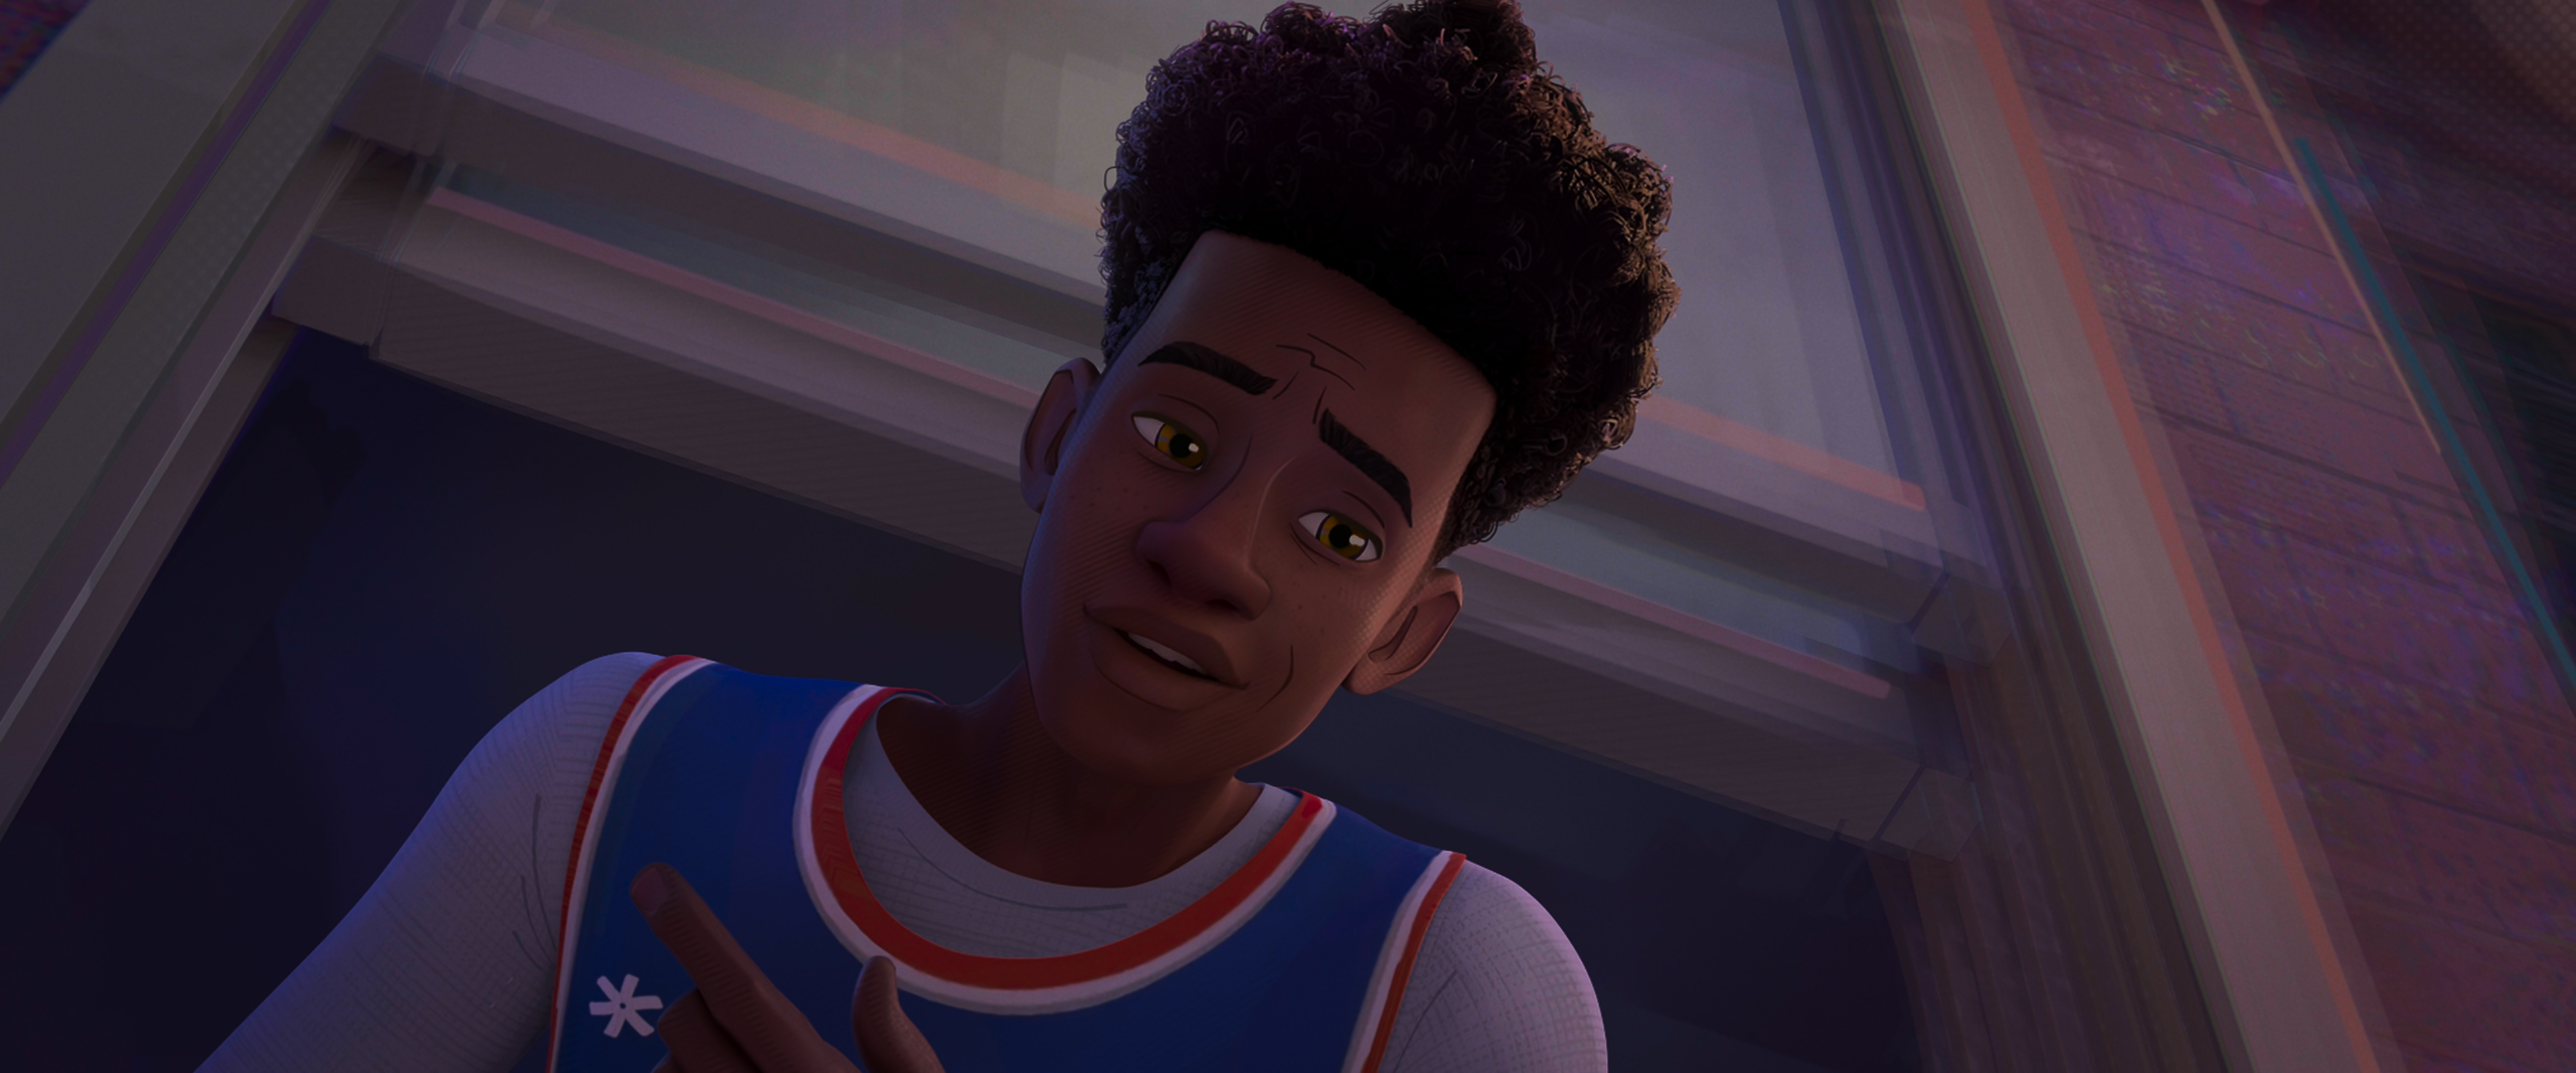 https://static.wikia.nocookie.net/intothespiderverse/images/6/6c/Screenshot_2023-04-08_9.00.56_PM.png/revision/latest?cb=20231003020958